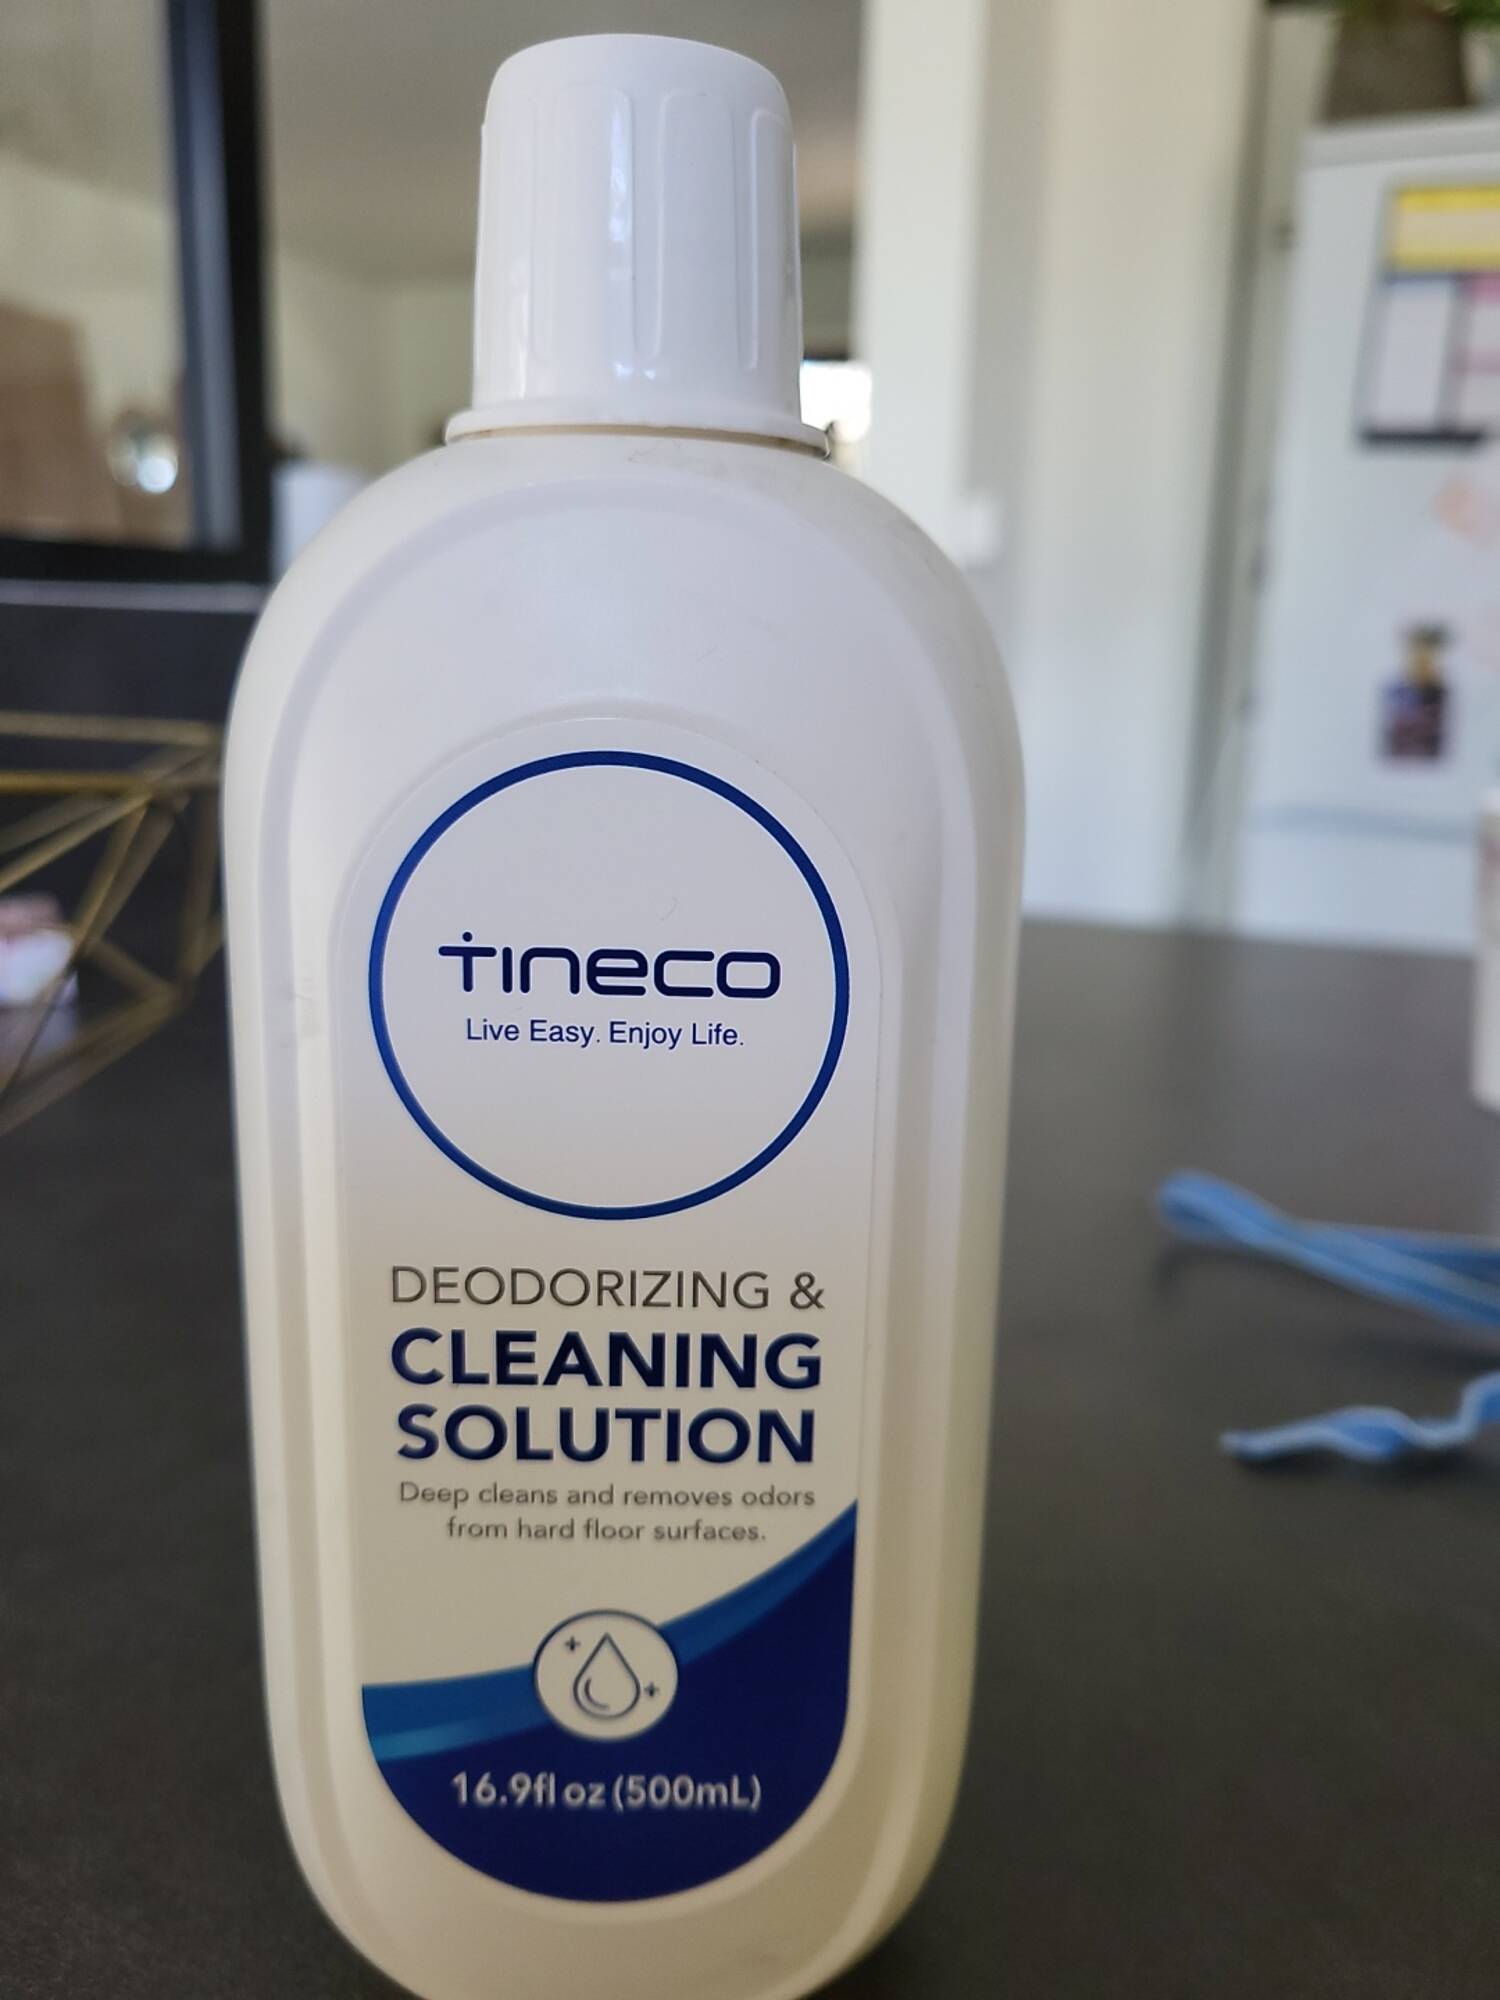 TINECO - Deodorizing & clearing solution